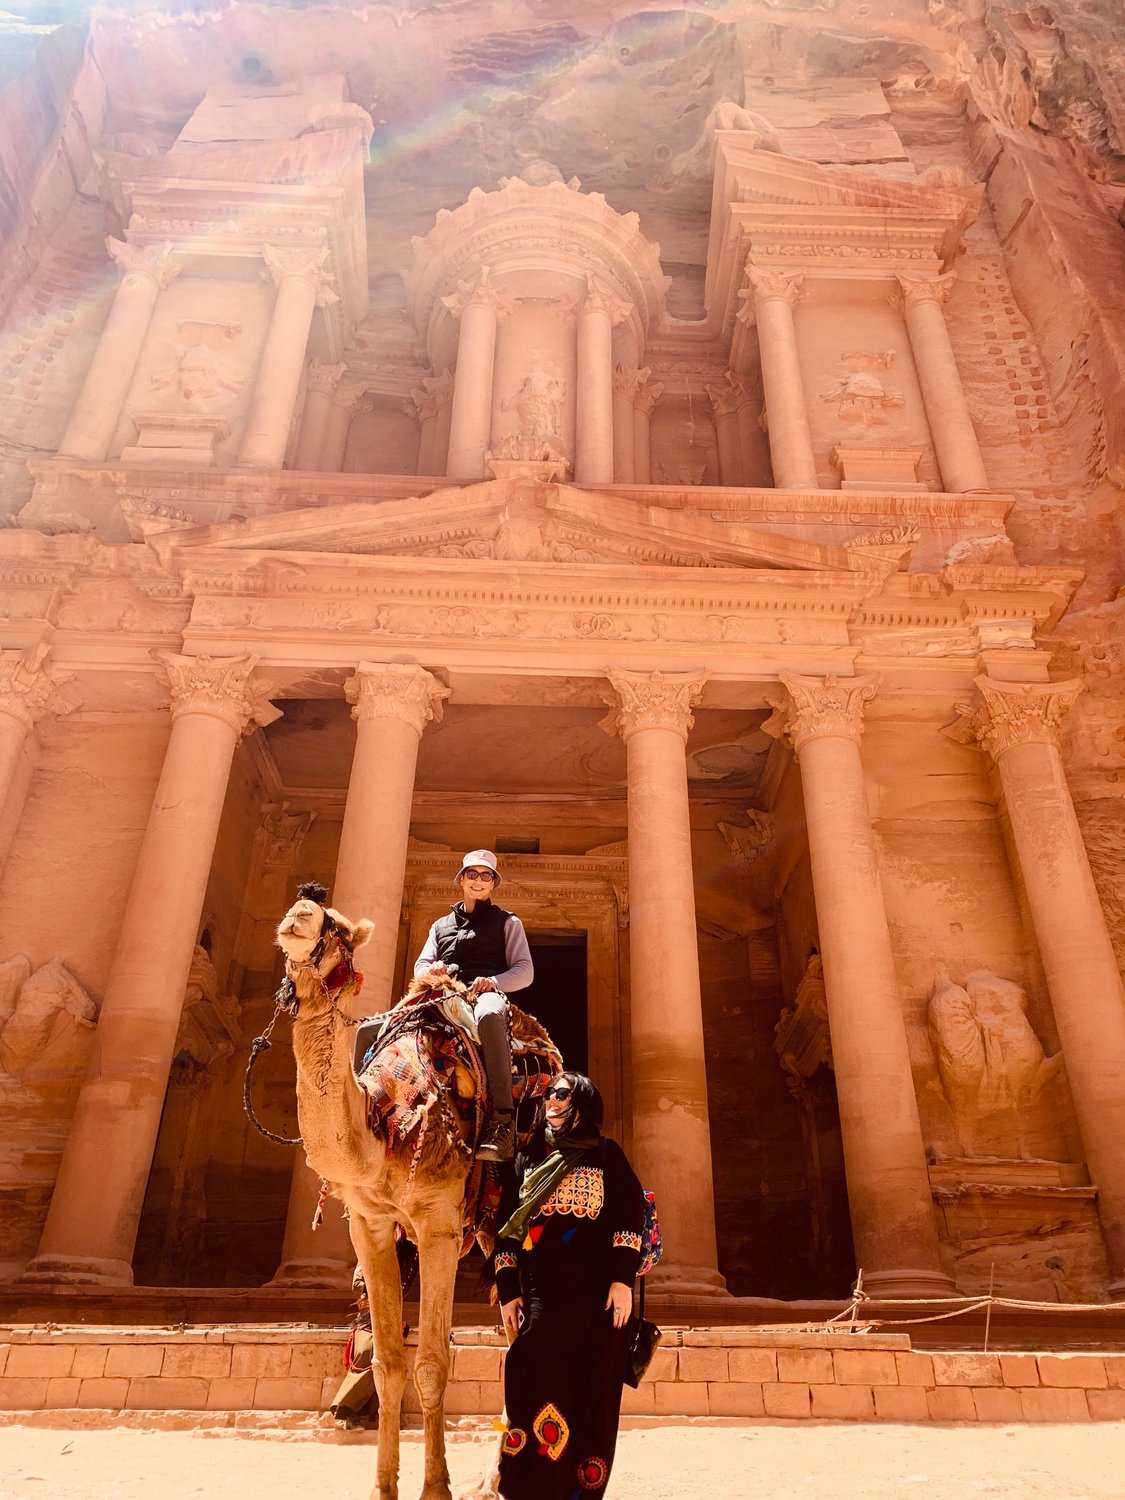 My husband, a camel and me in front of the treasury in Petra, where “Indiana Jones and the Last Crusade” was filmed.